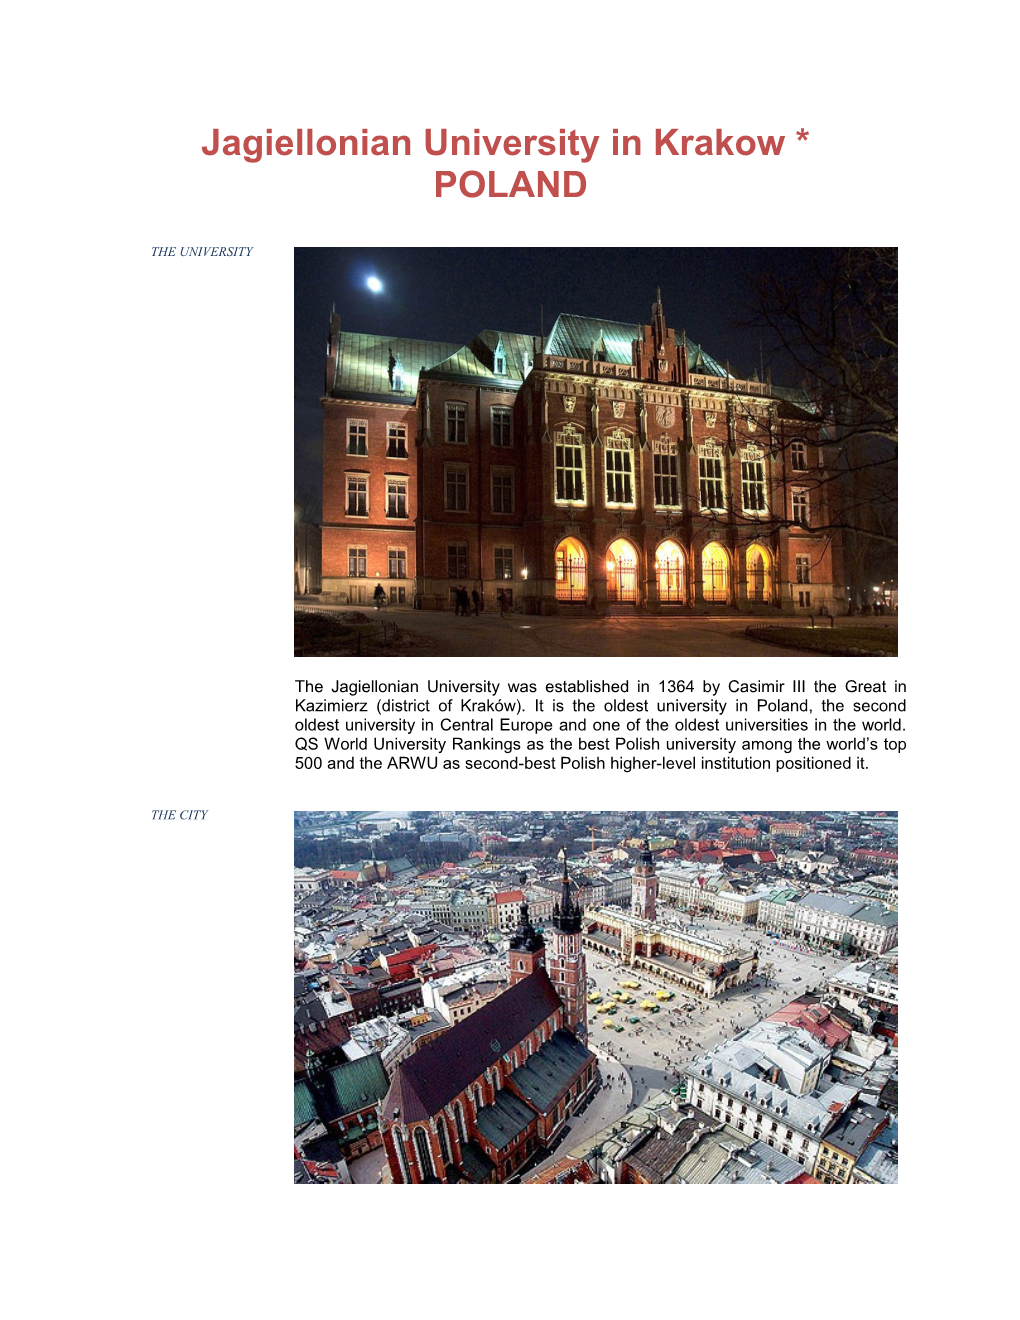 Courses Taught in Polish Within Degree Programs